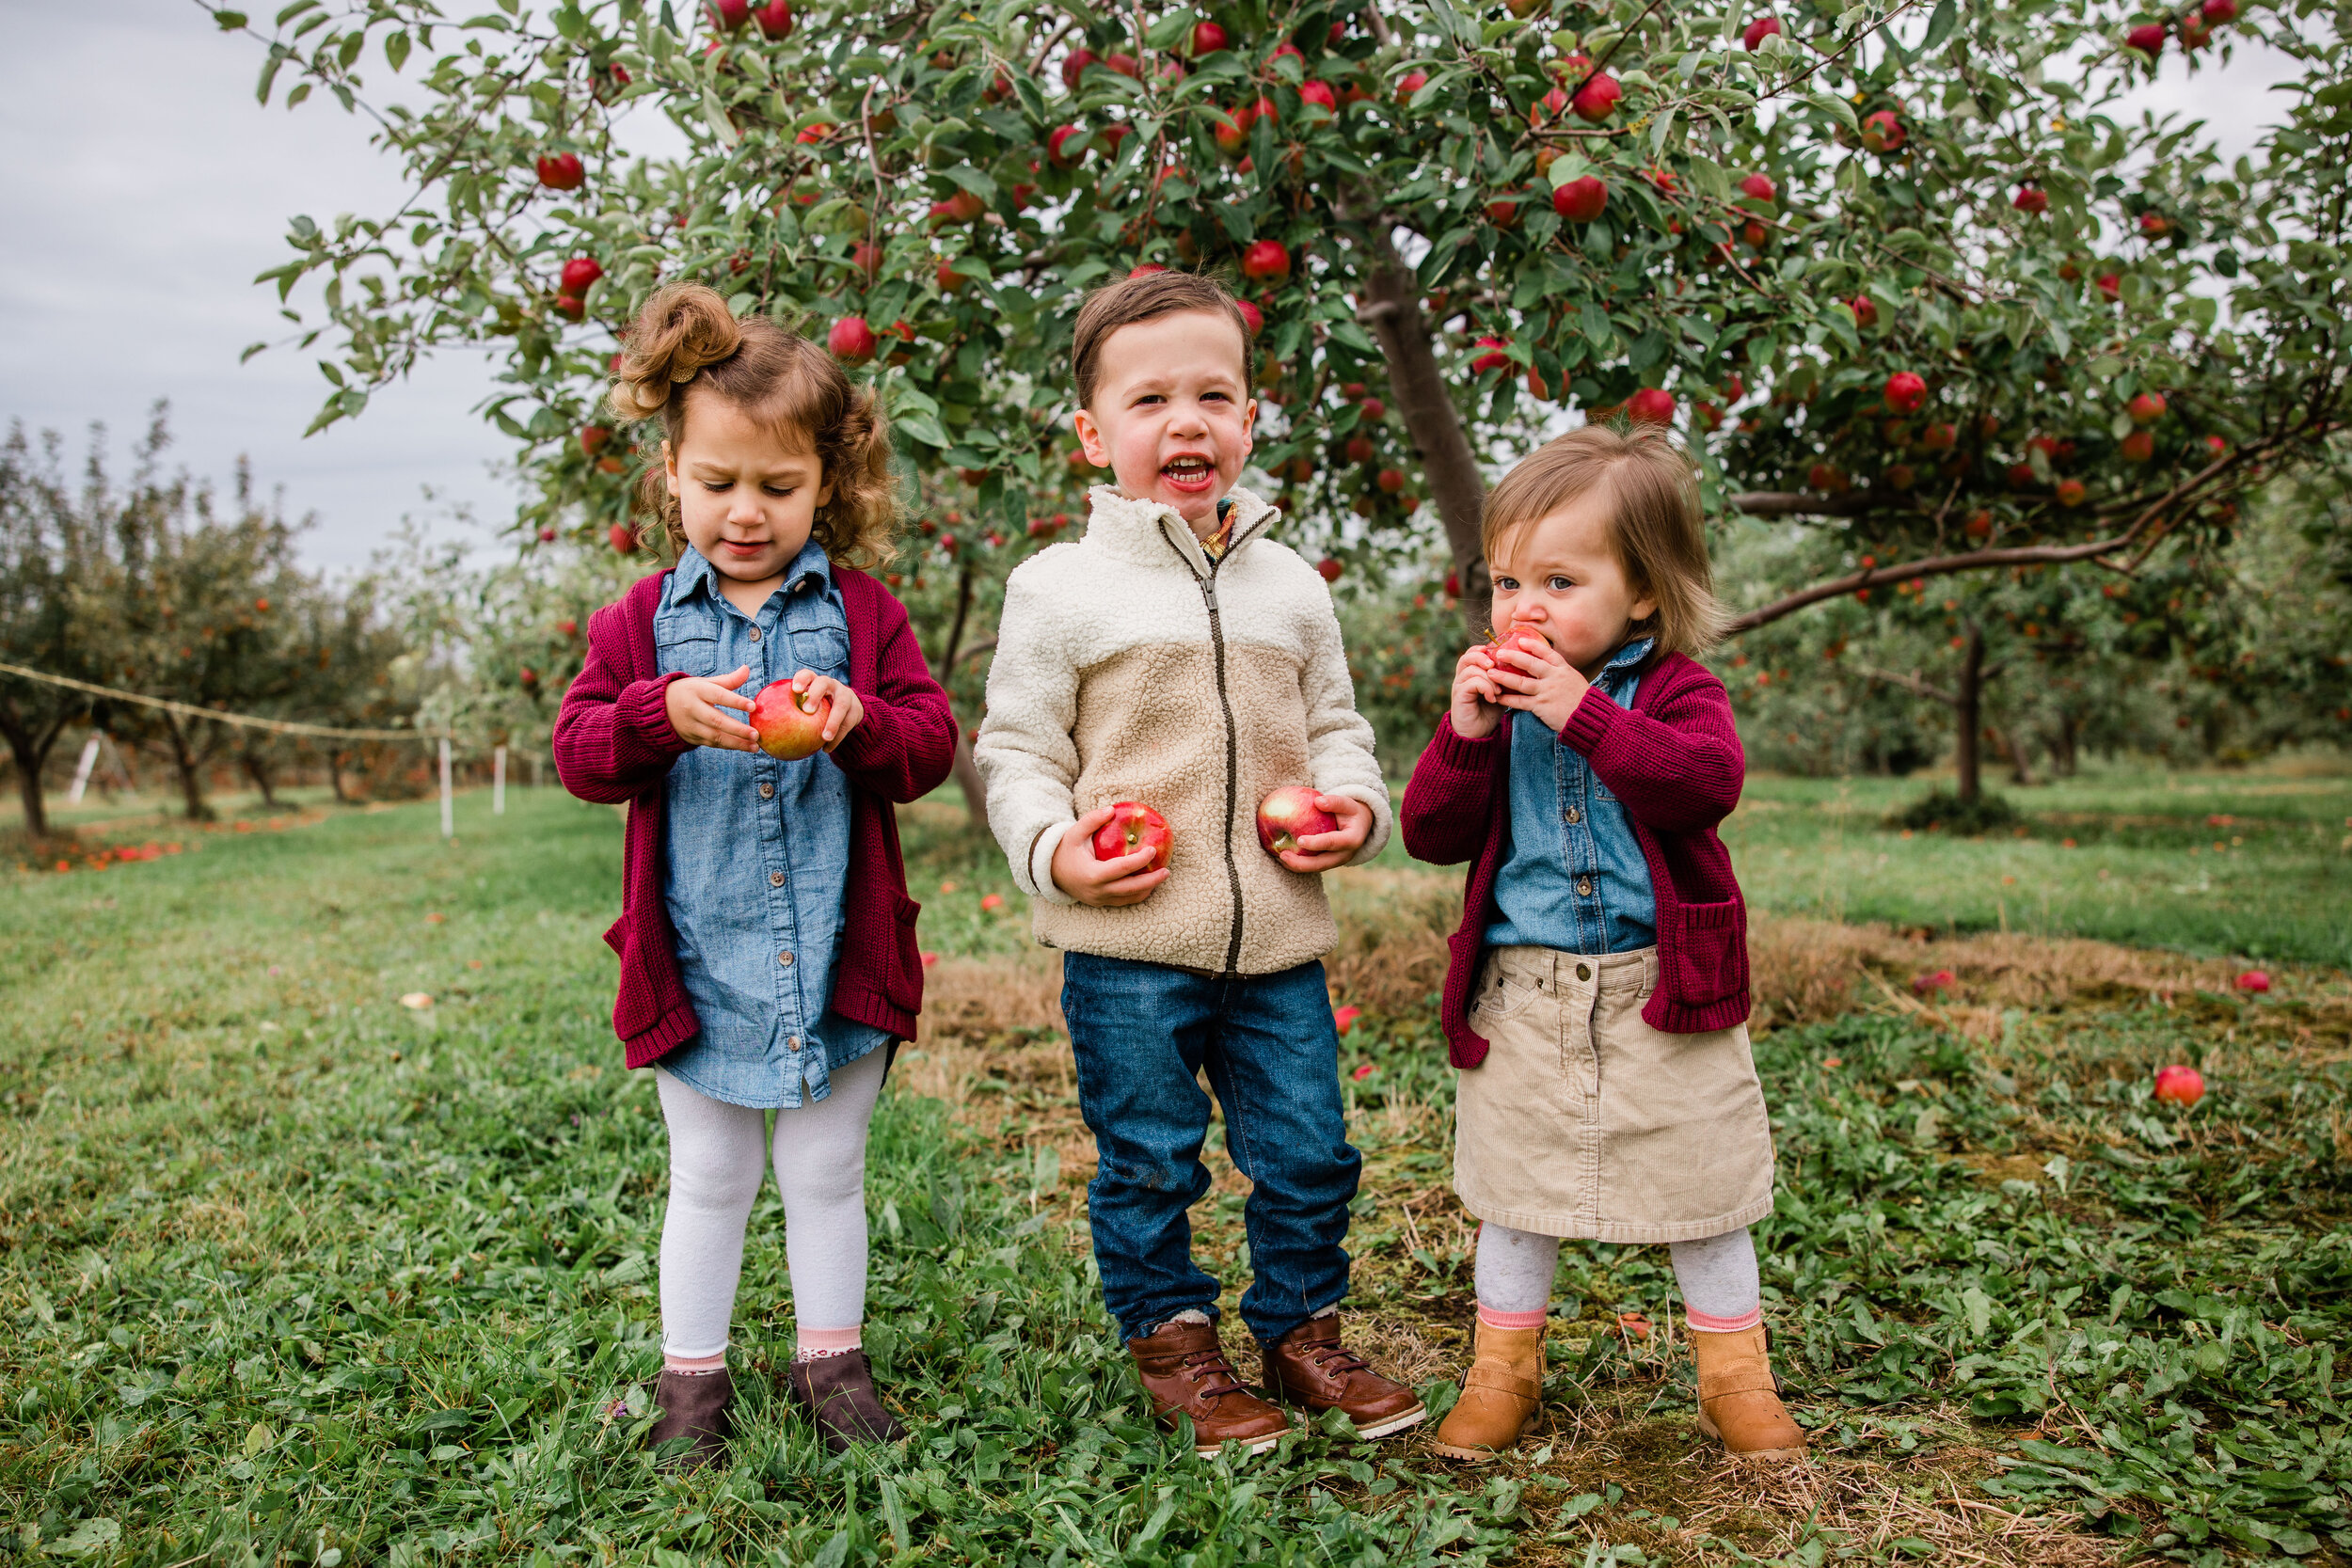 Mini Session at Robertson Orchards-8.jpg